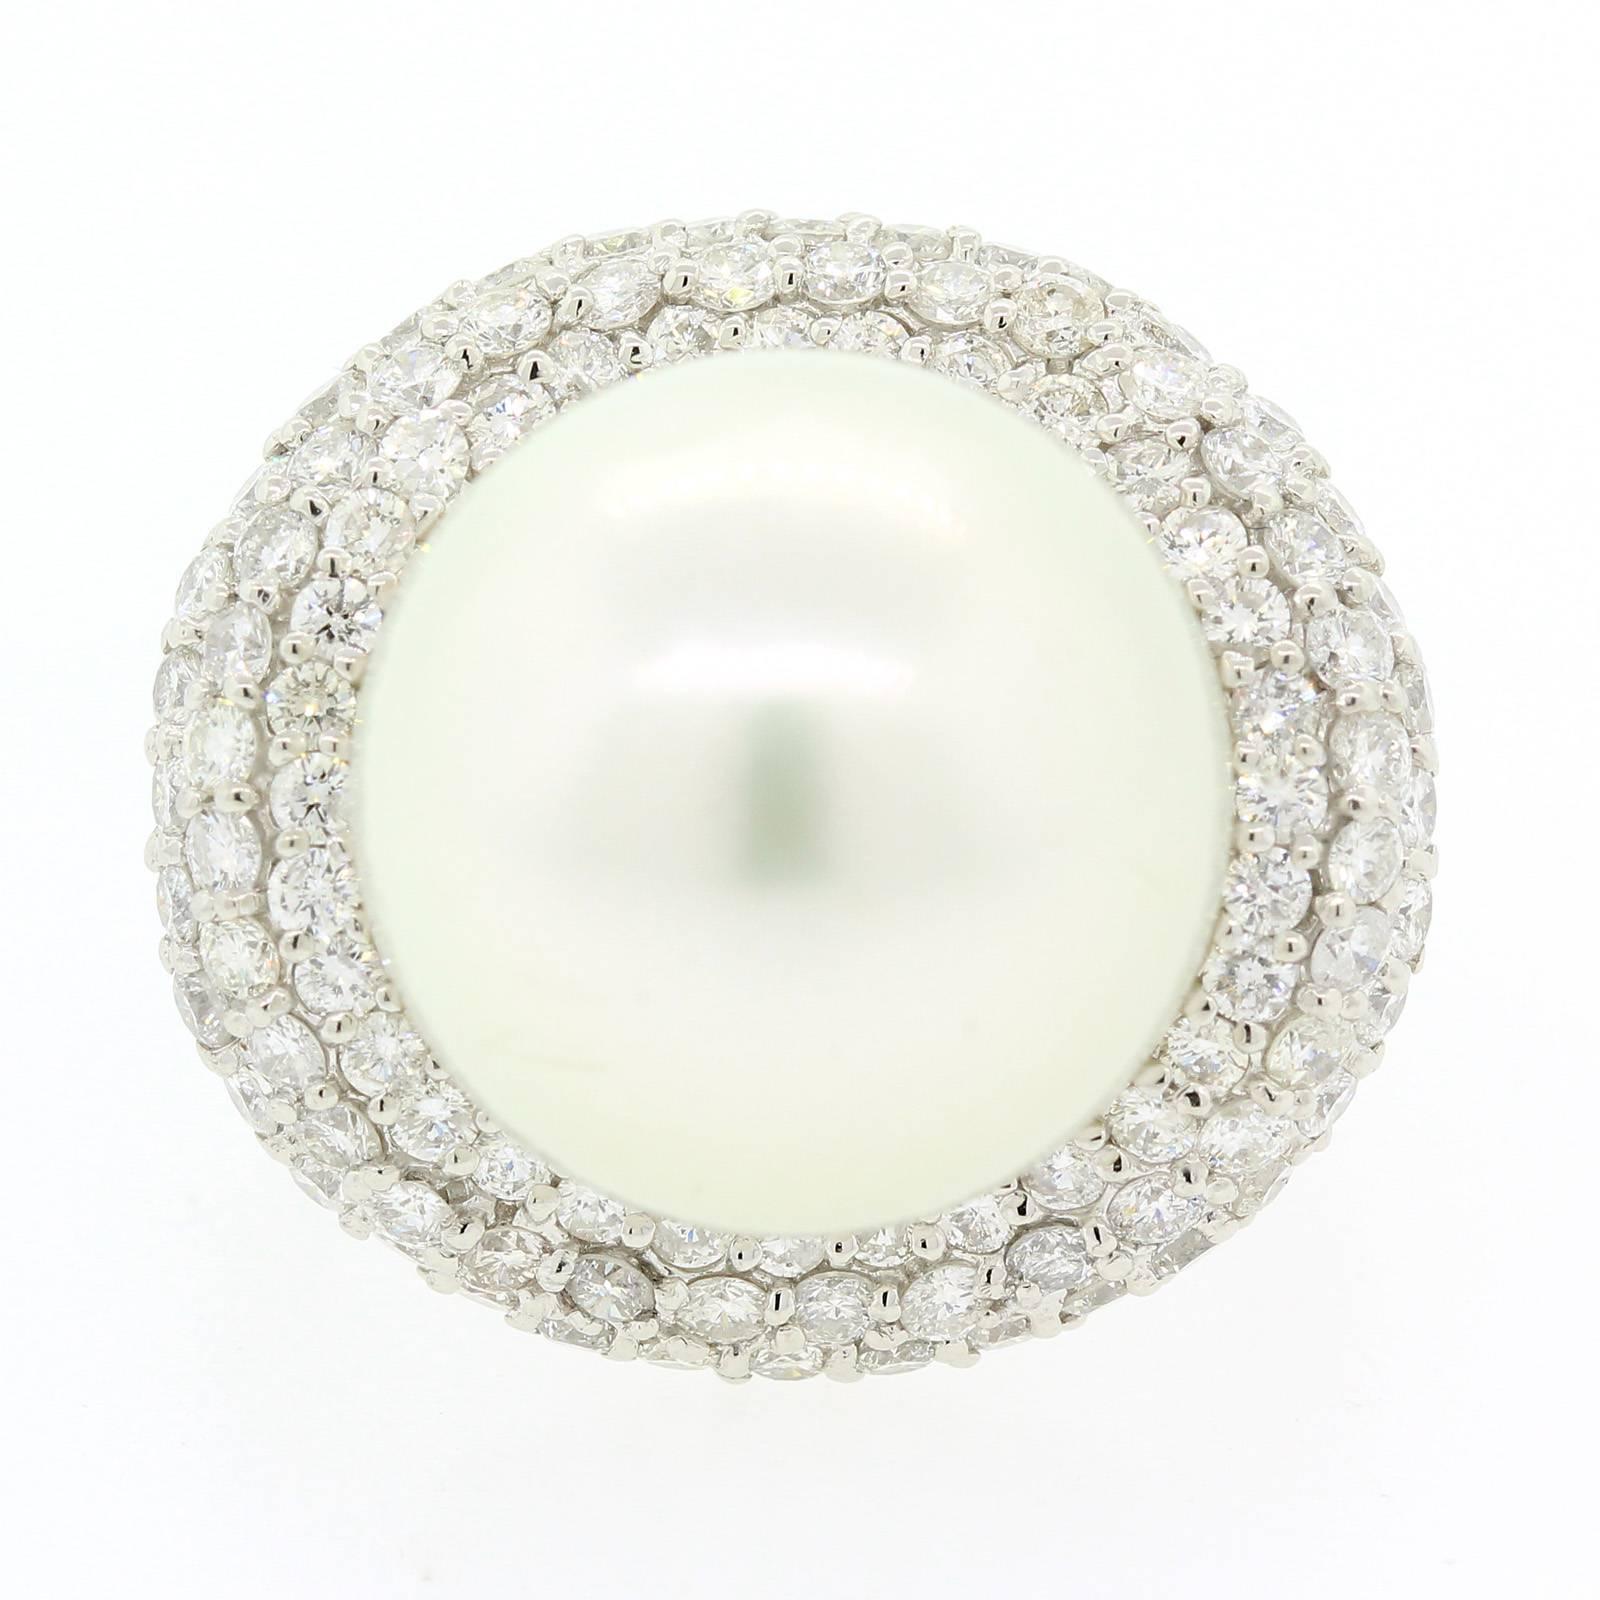 Lustrous 15.00 mm white South Sea Pearl ring.  This pretty Pearl is nestled in a 18KT white gold wave, pave set with 1.90 carat of Round Brilliant Cut Diamonds.  This impressive ring is ring size 7.  Yes, it is beautiful! 